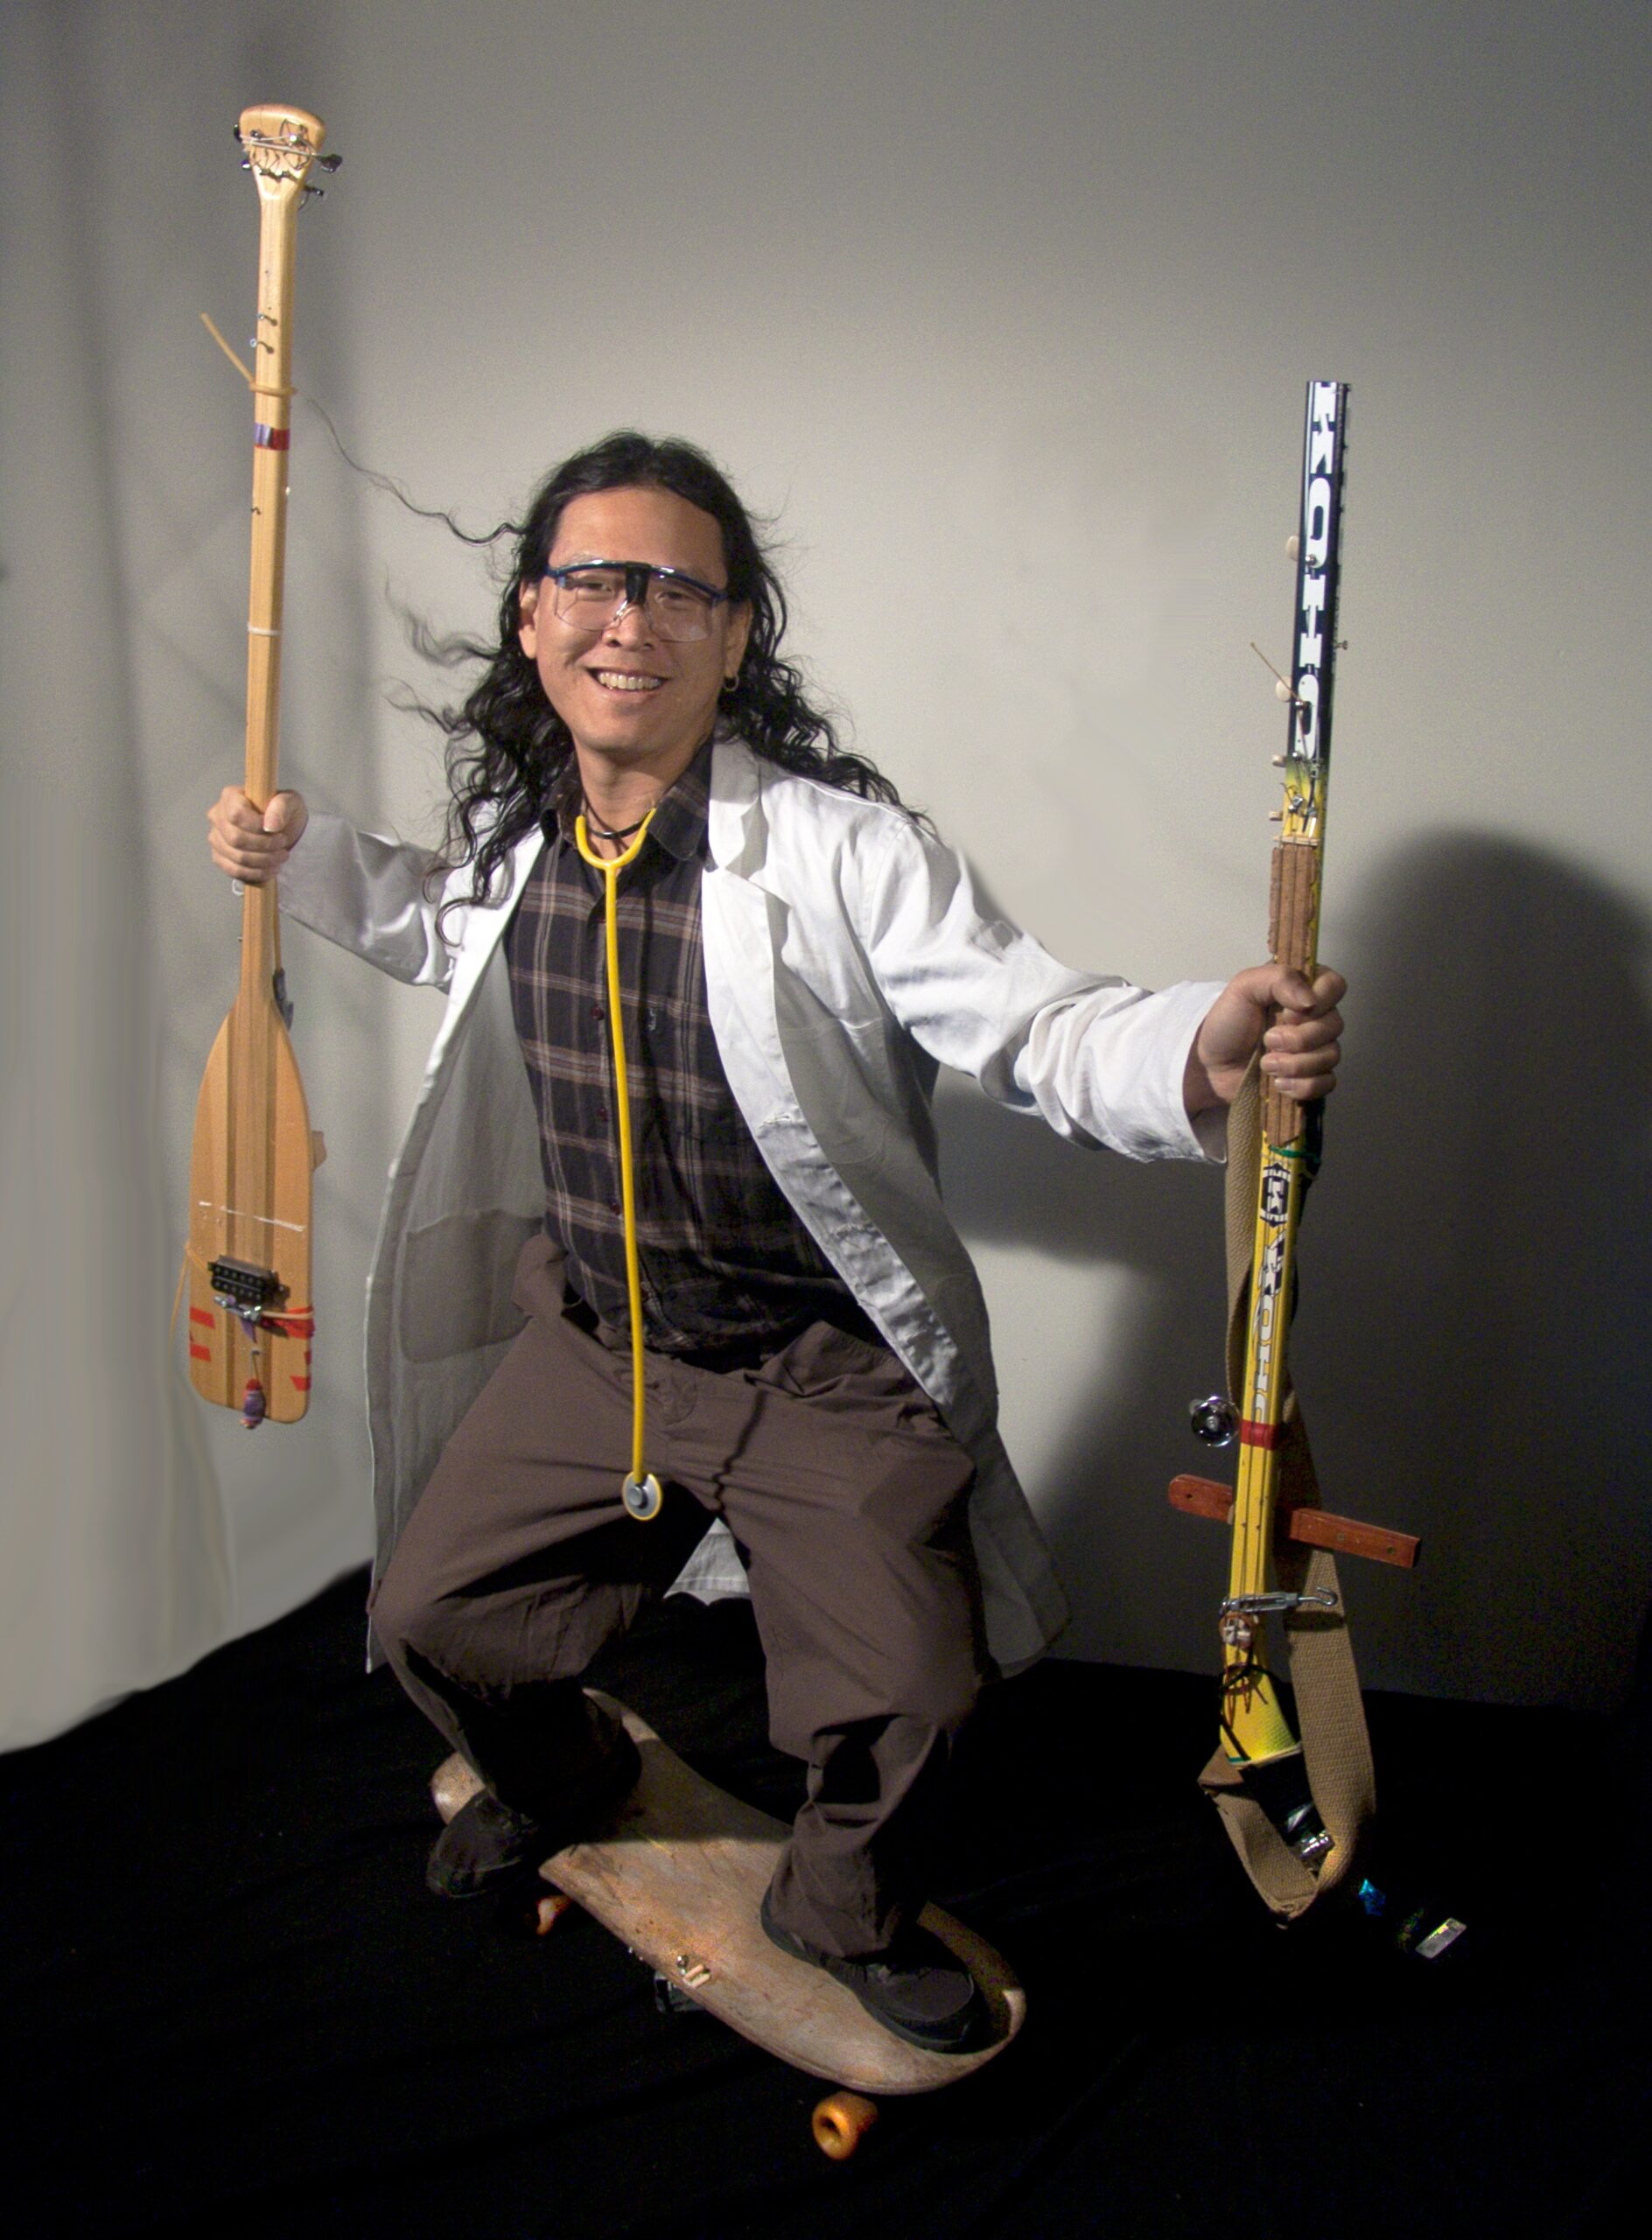 A man holds instruments made out of a hockey stick and boat paddle